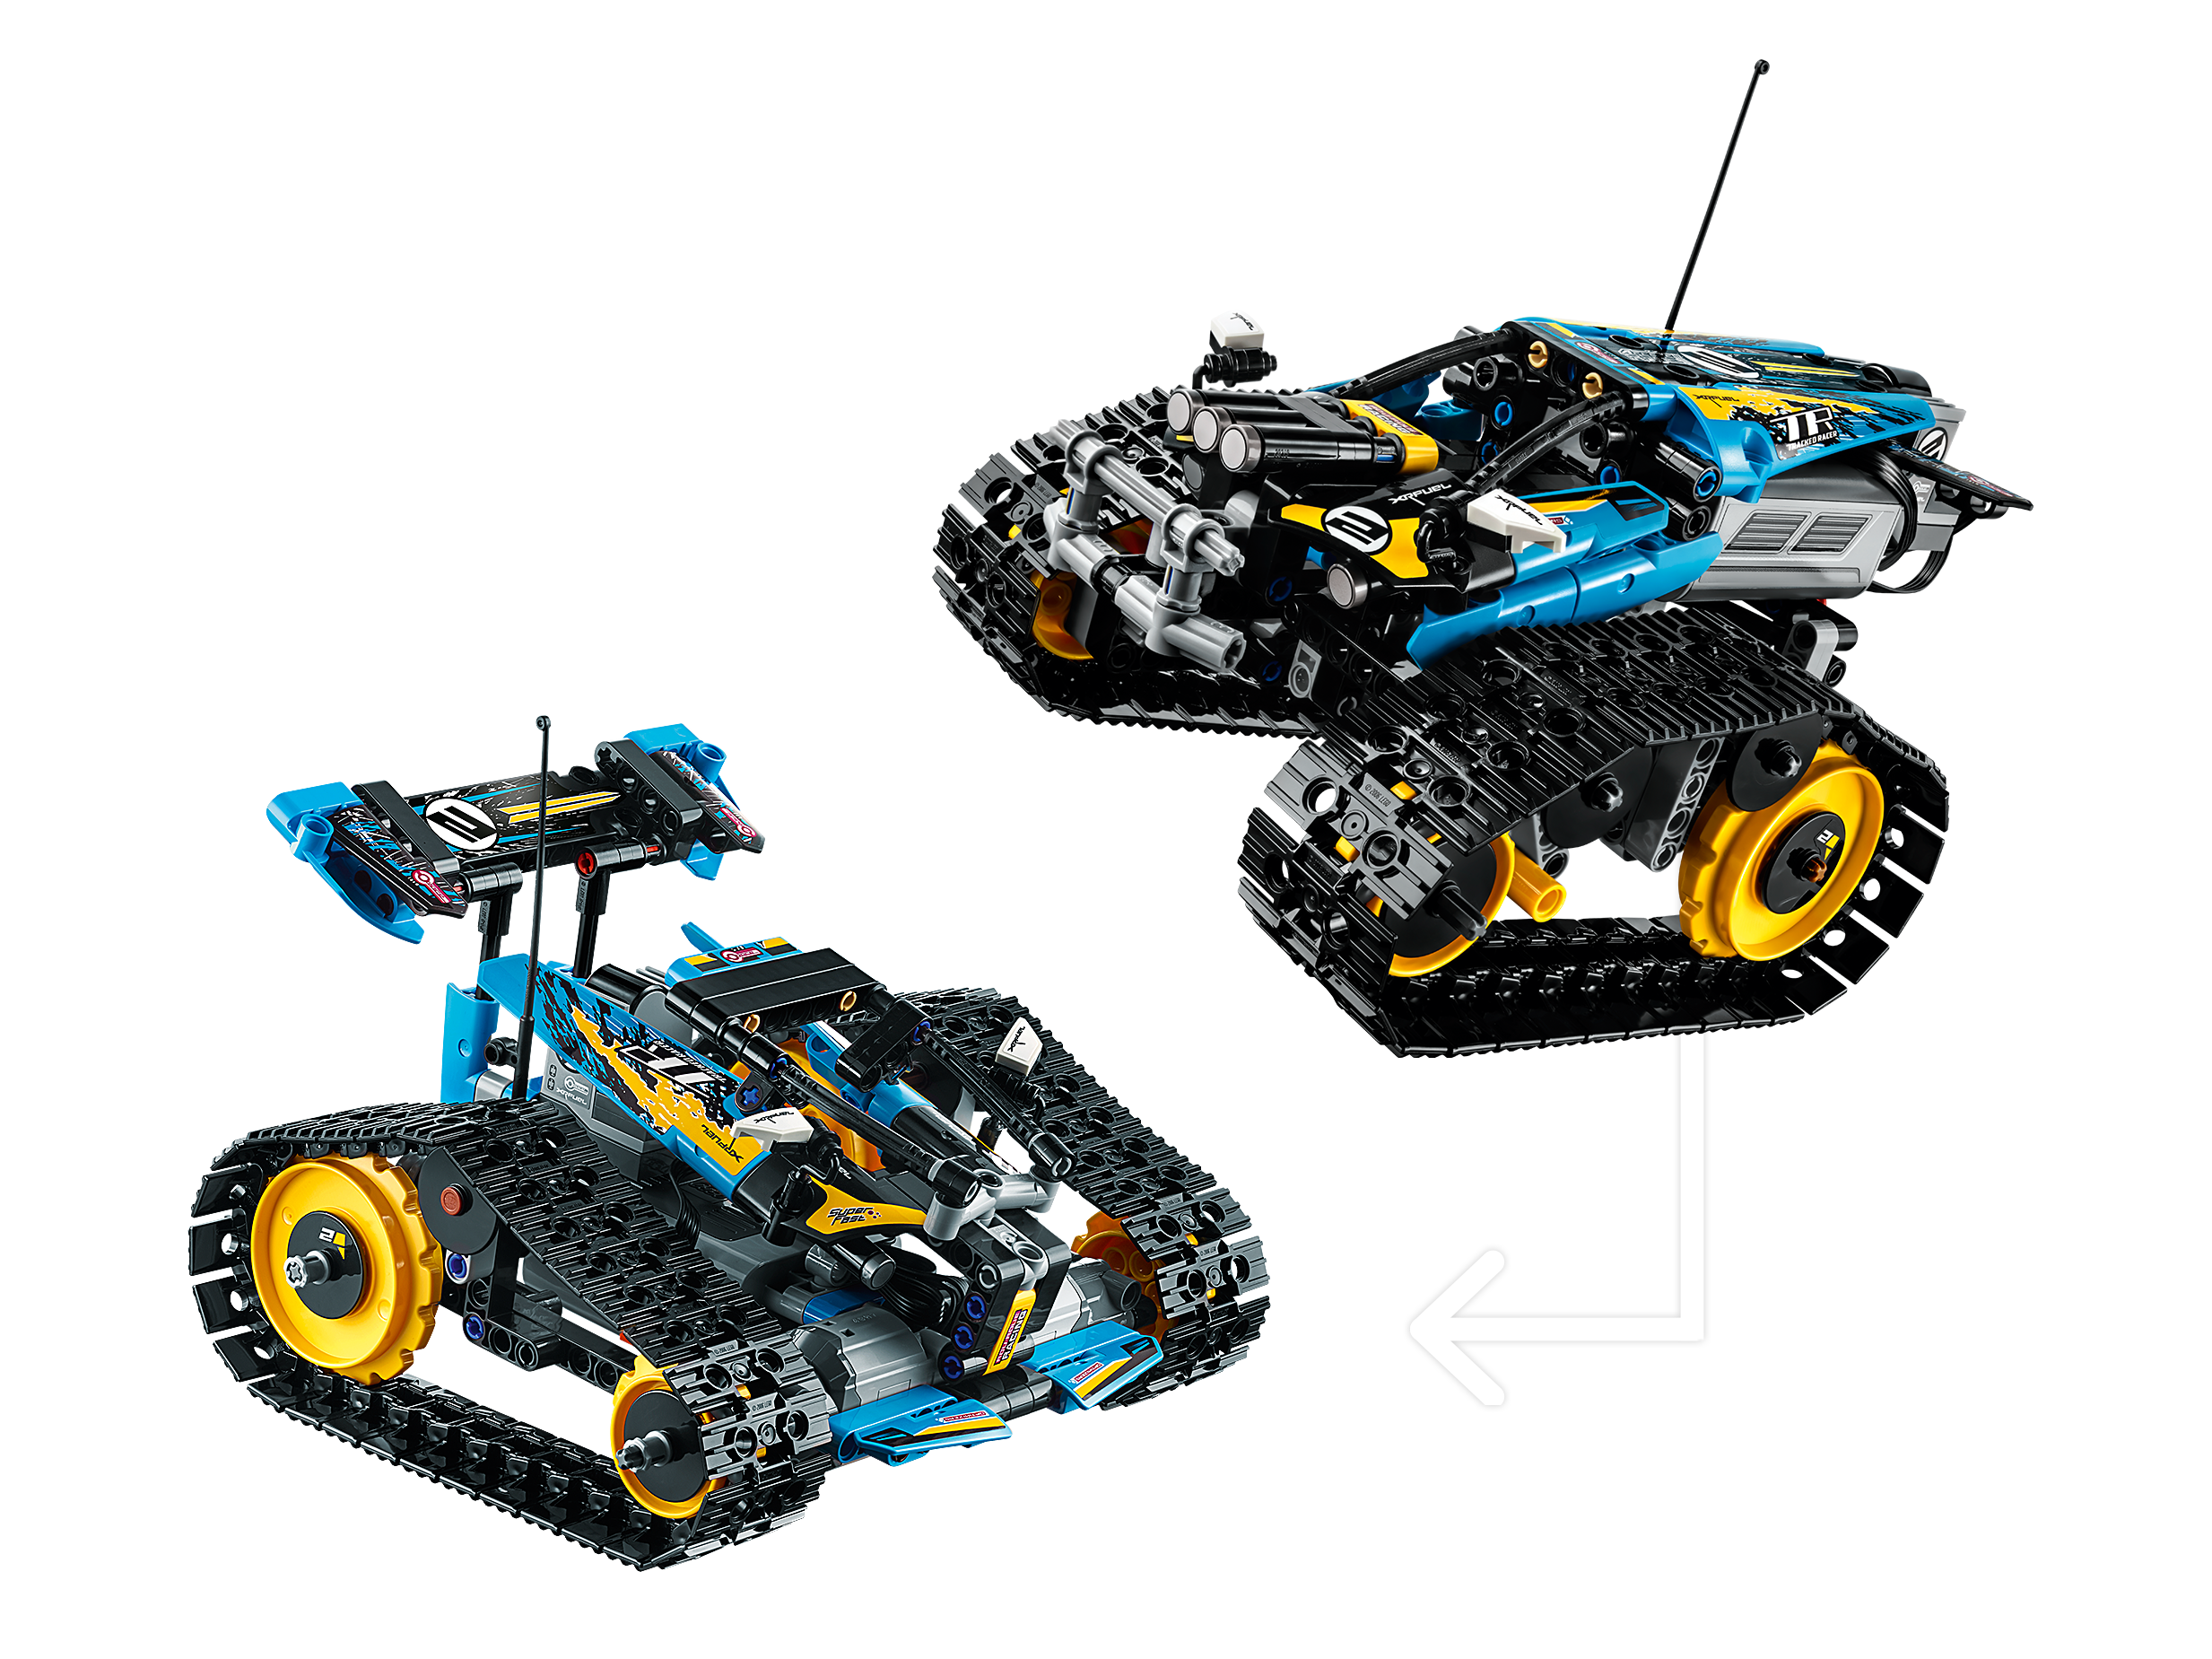 Details about   Technic RC Car Building Blocks Bricks Remote Control Stunt Racer GREAT KIDS GIFT 